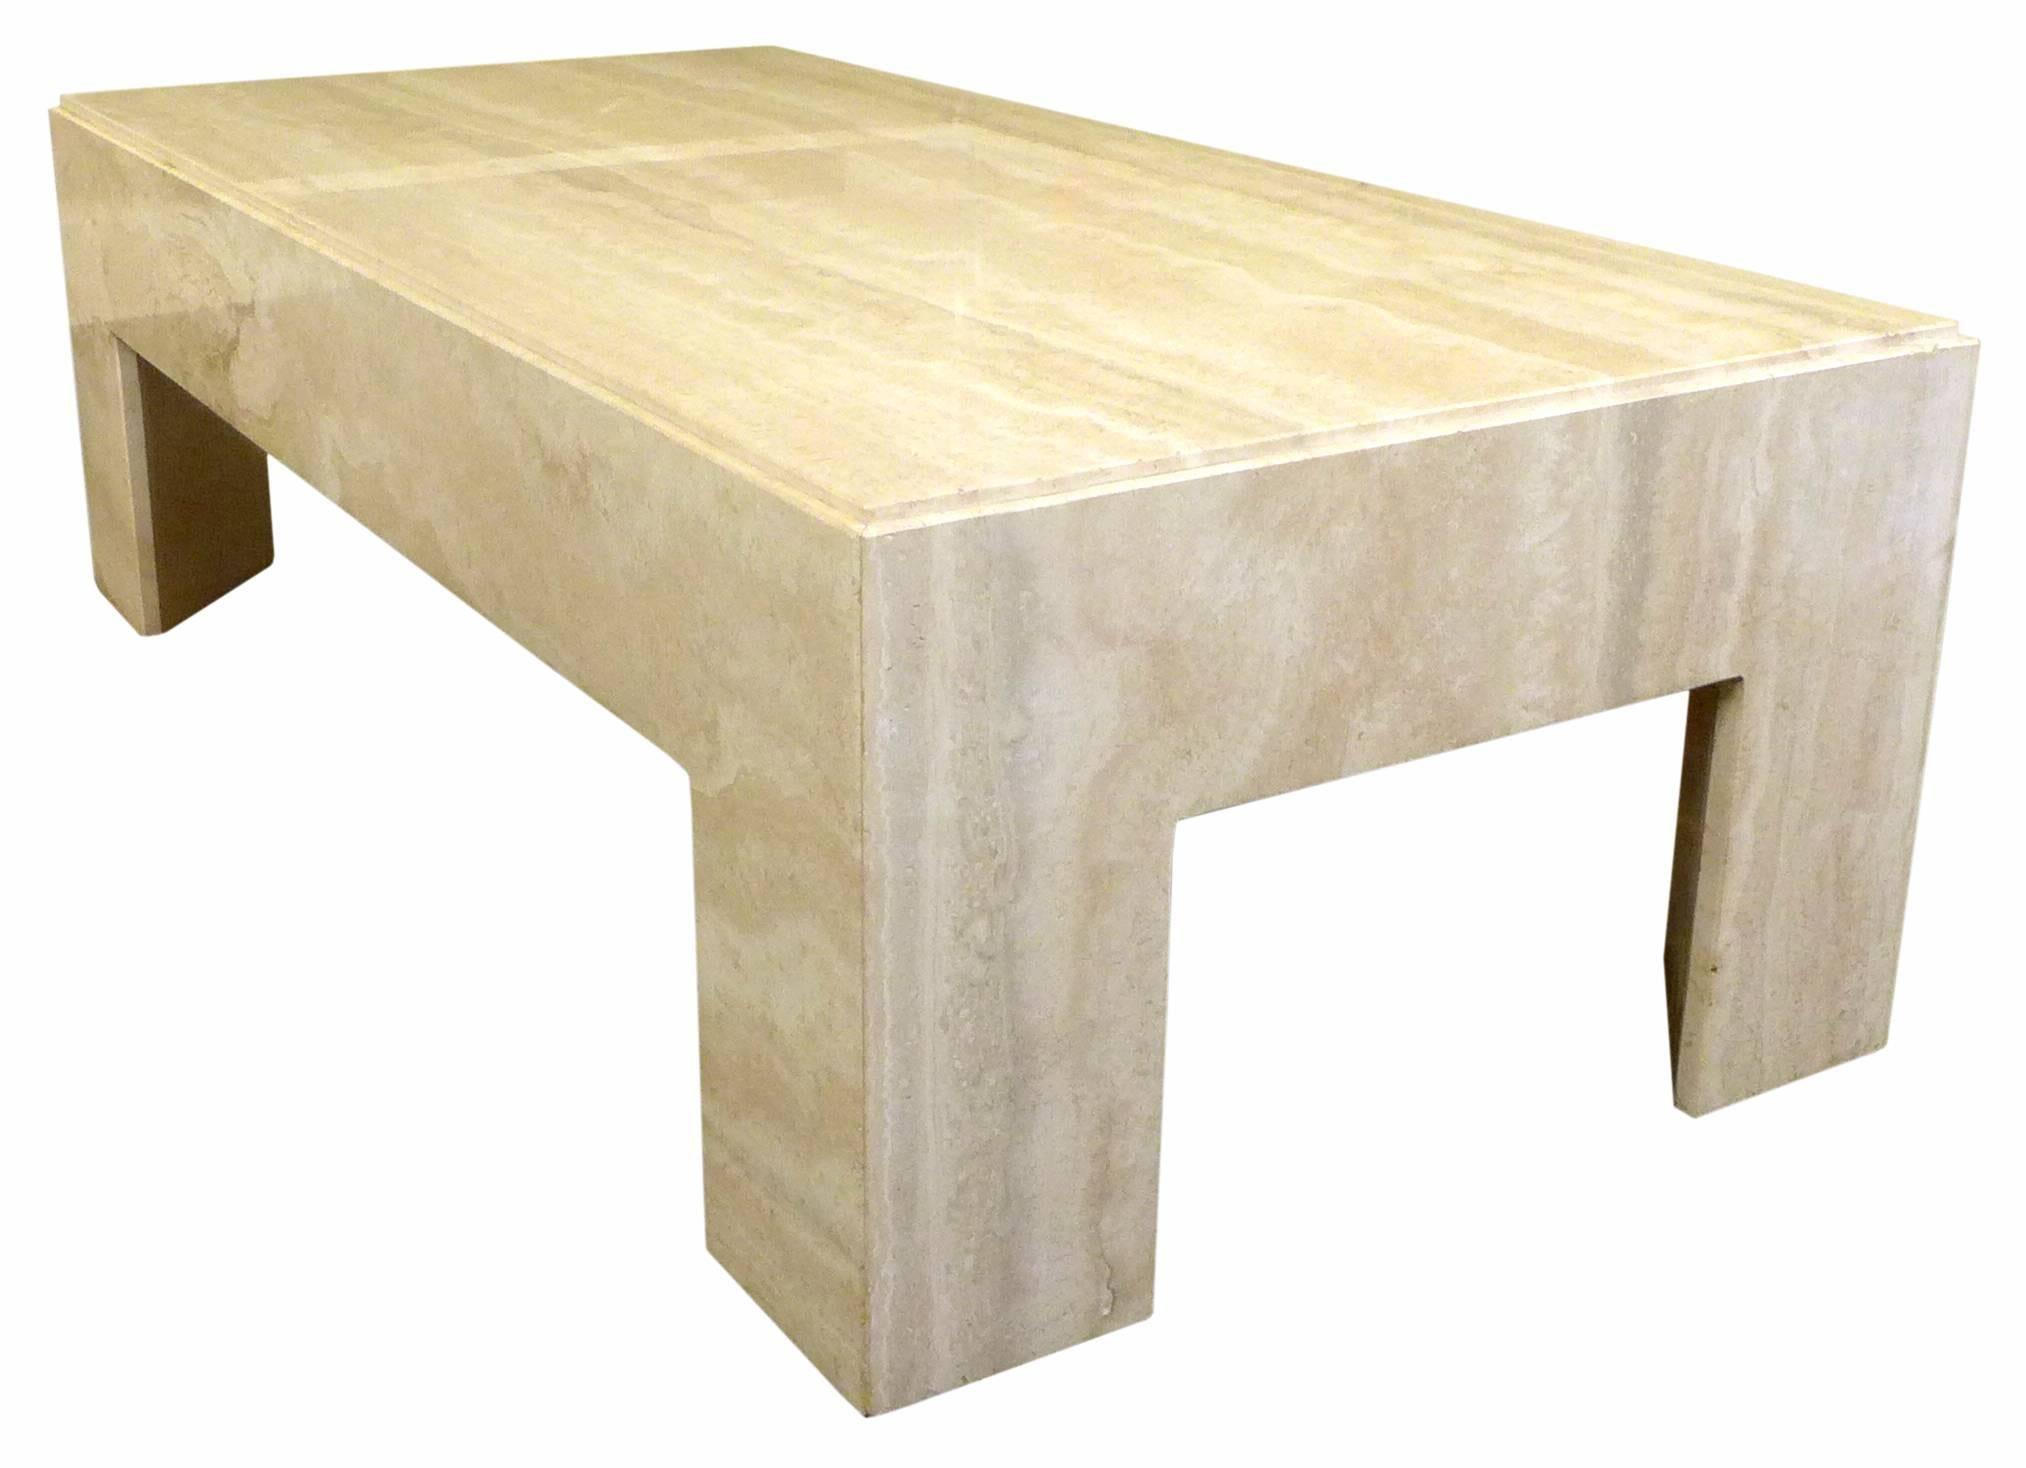 A fantastic travertine coffee table. An incredible form of great proportion and unexpected detail. Though hollow underneath, mitered travertine slabs built to imply one massive structure with prismatic legs and a decorative groove along the top